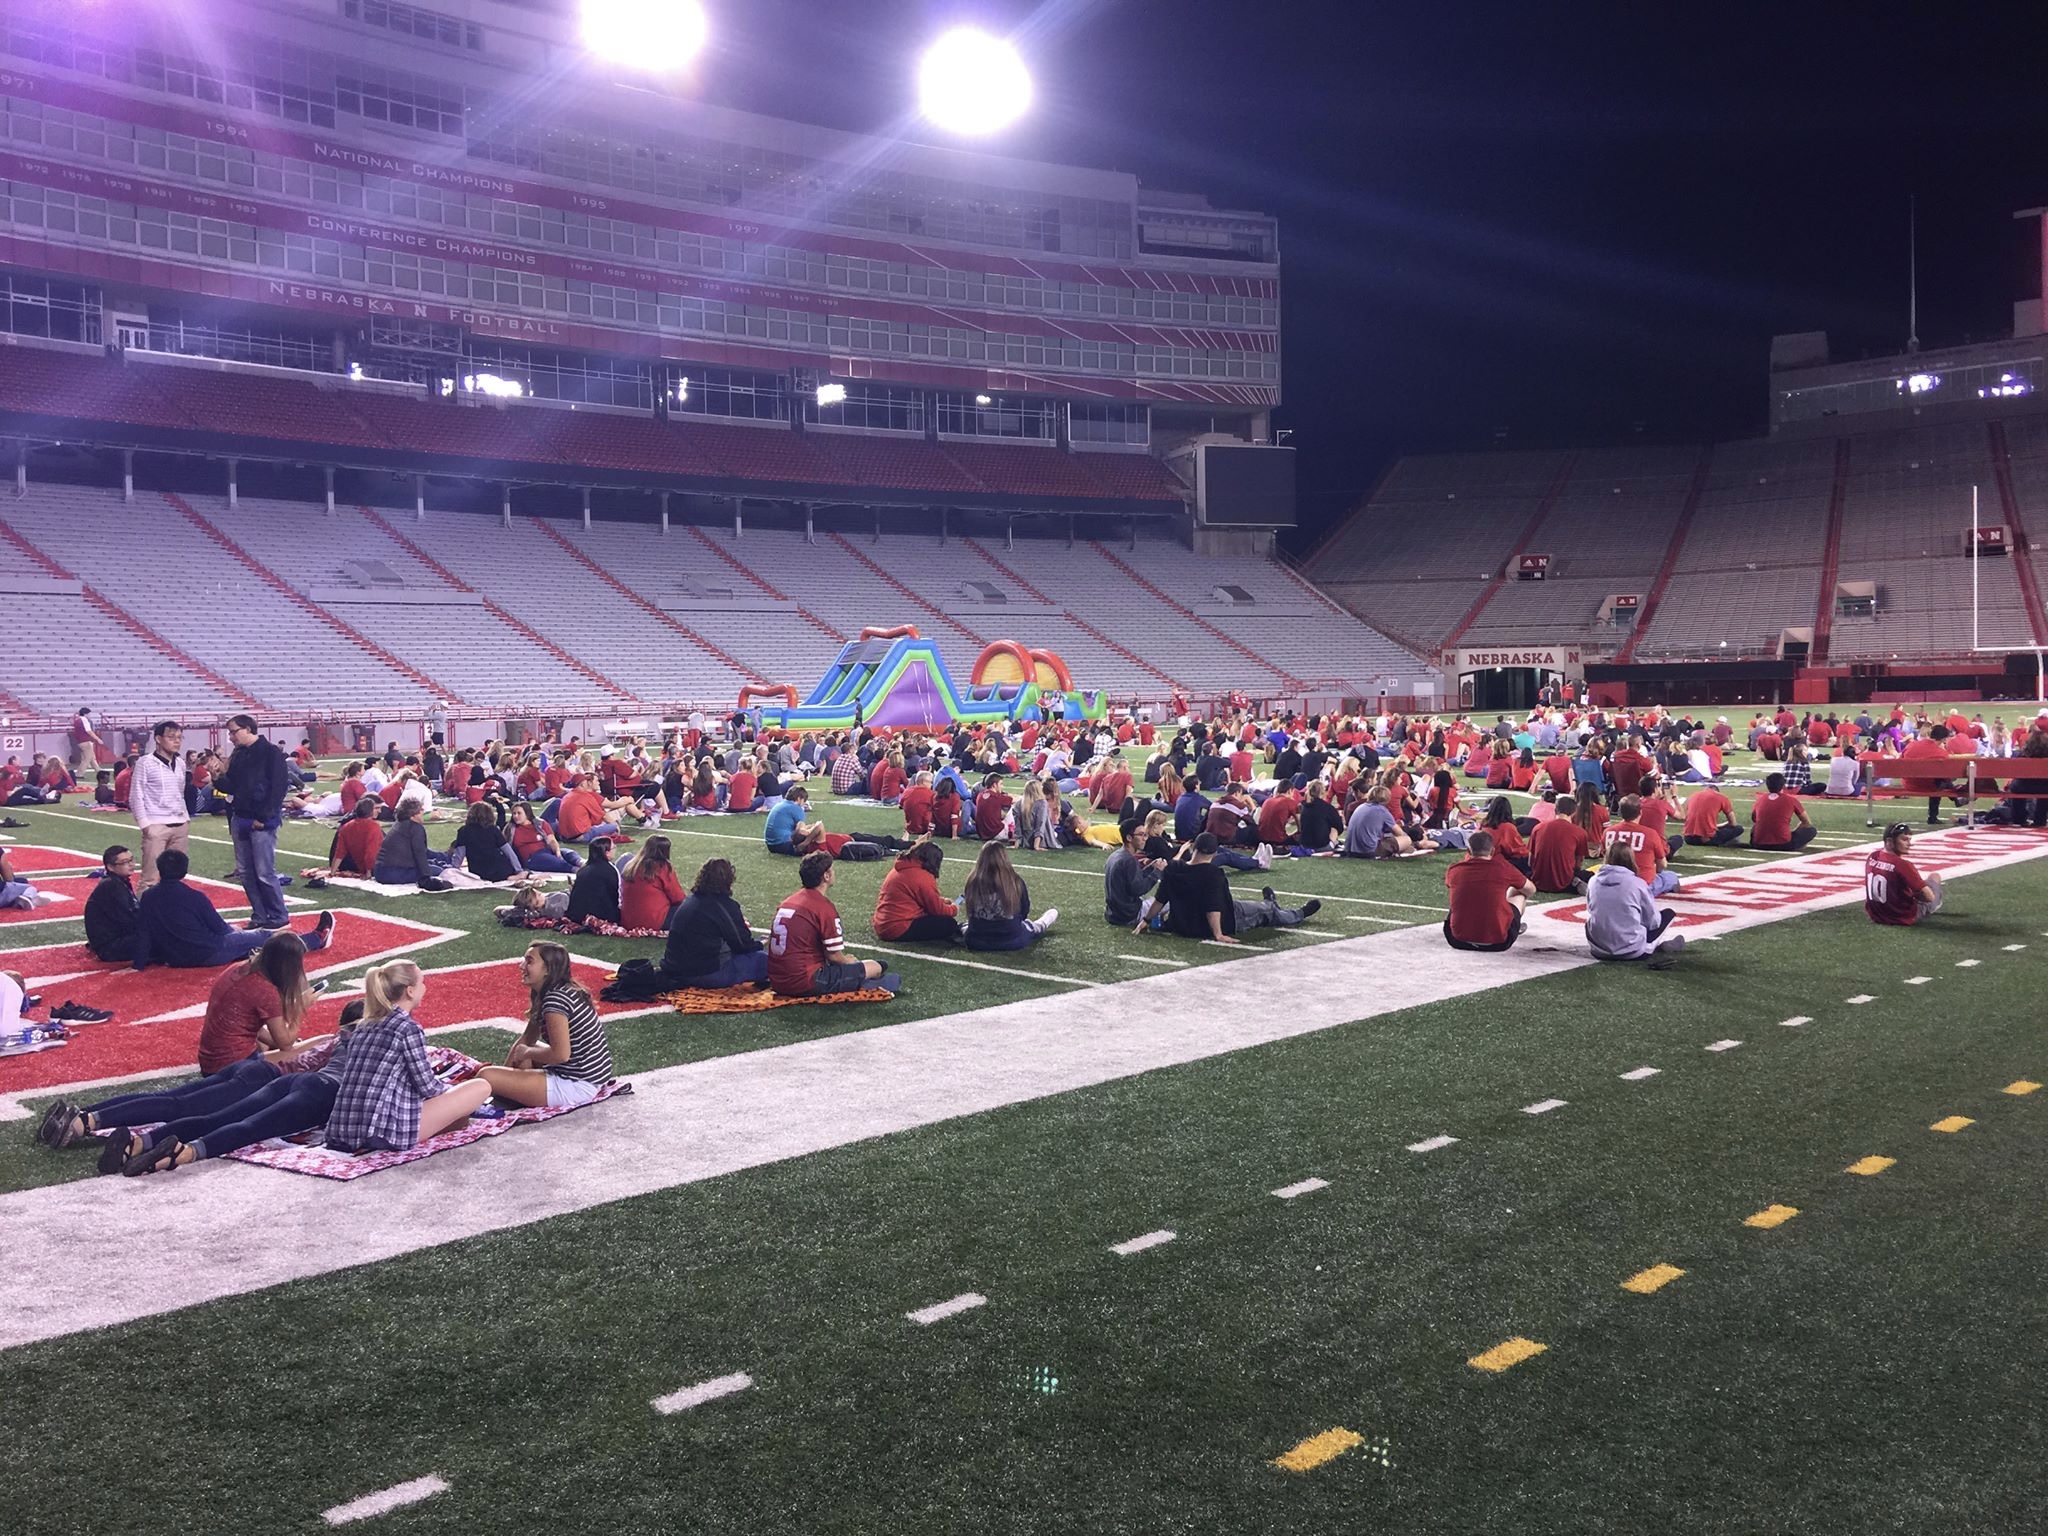 Students and family members watch a football game on the big screen in Memorial Stadium.